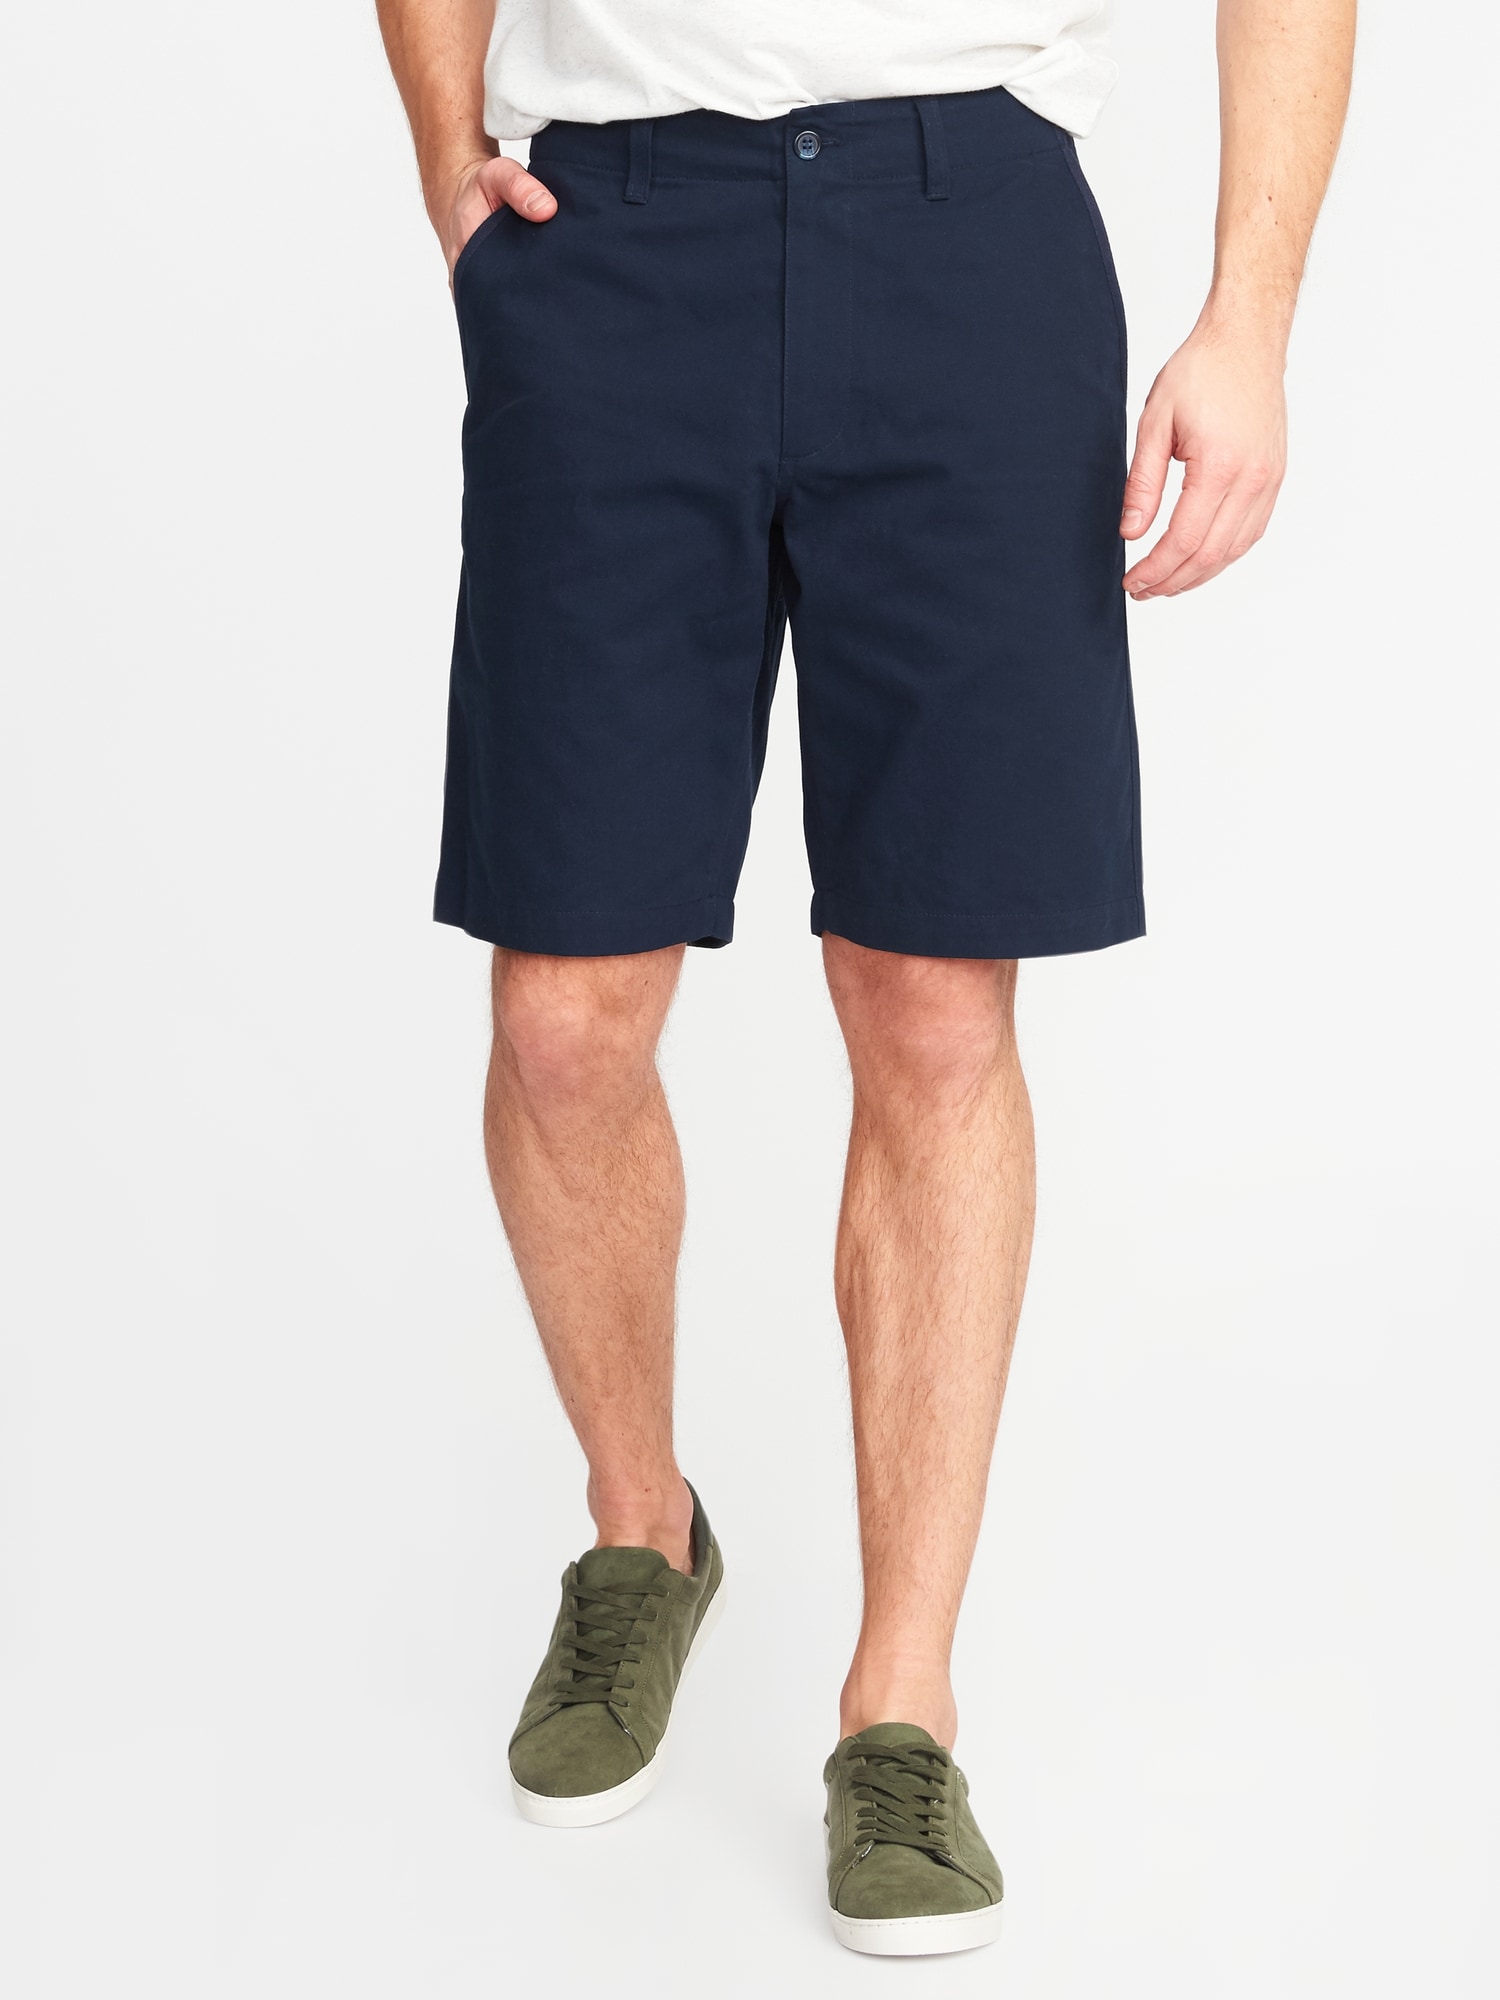 Lived-In Khaki Shorts for Men - 10-inch inseam | Old Navy